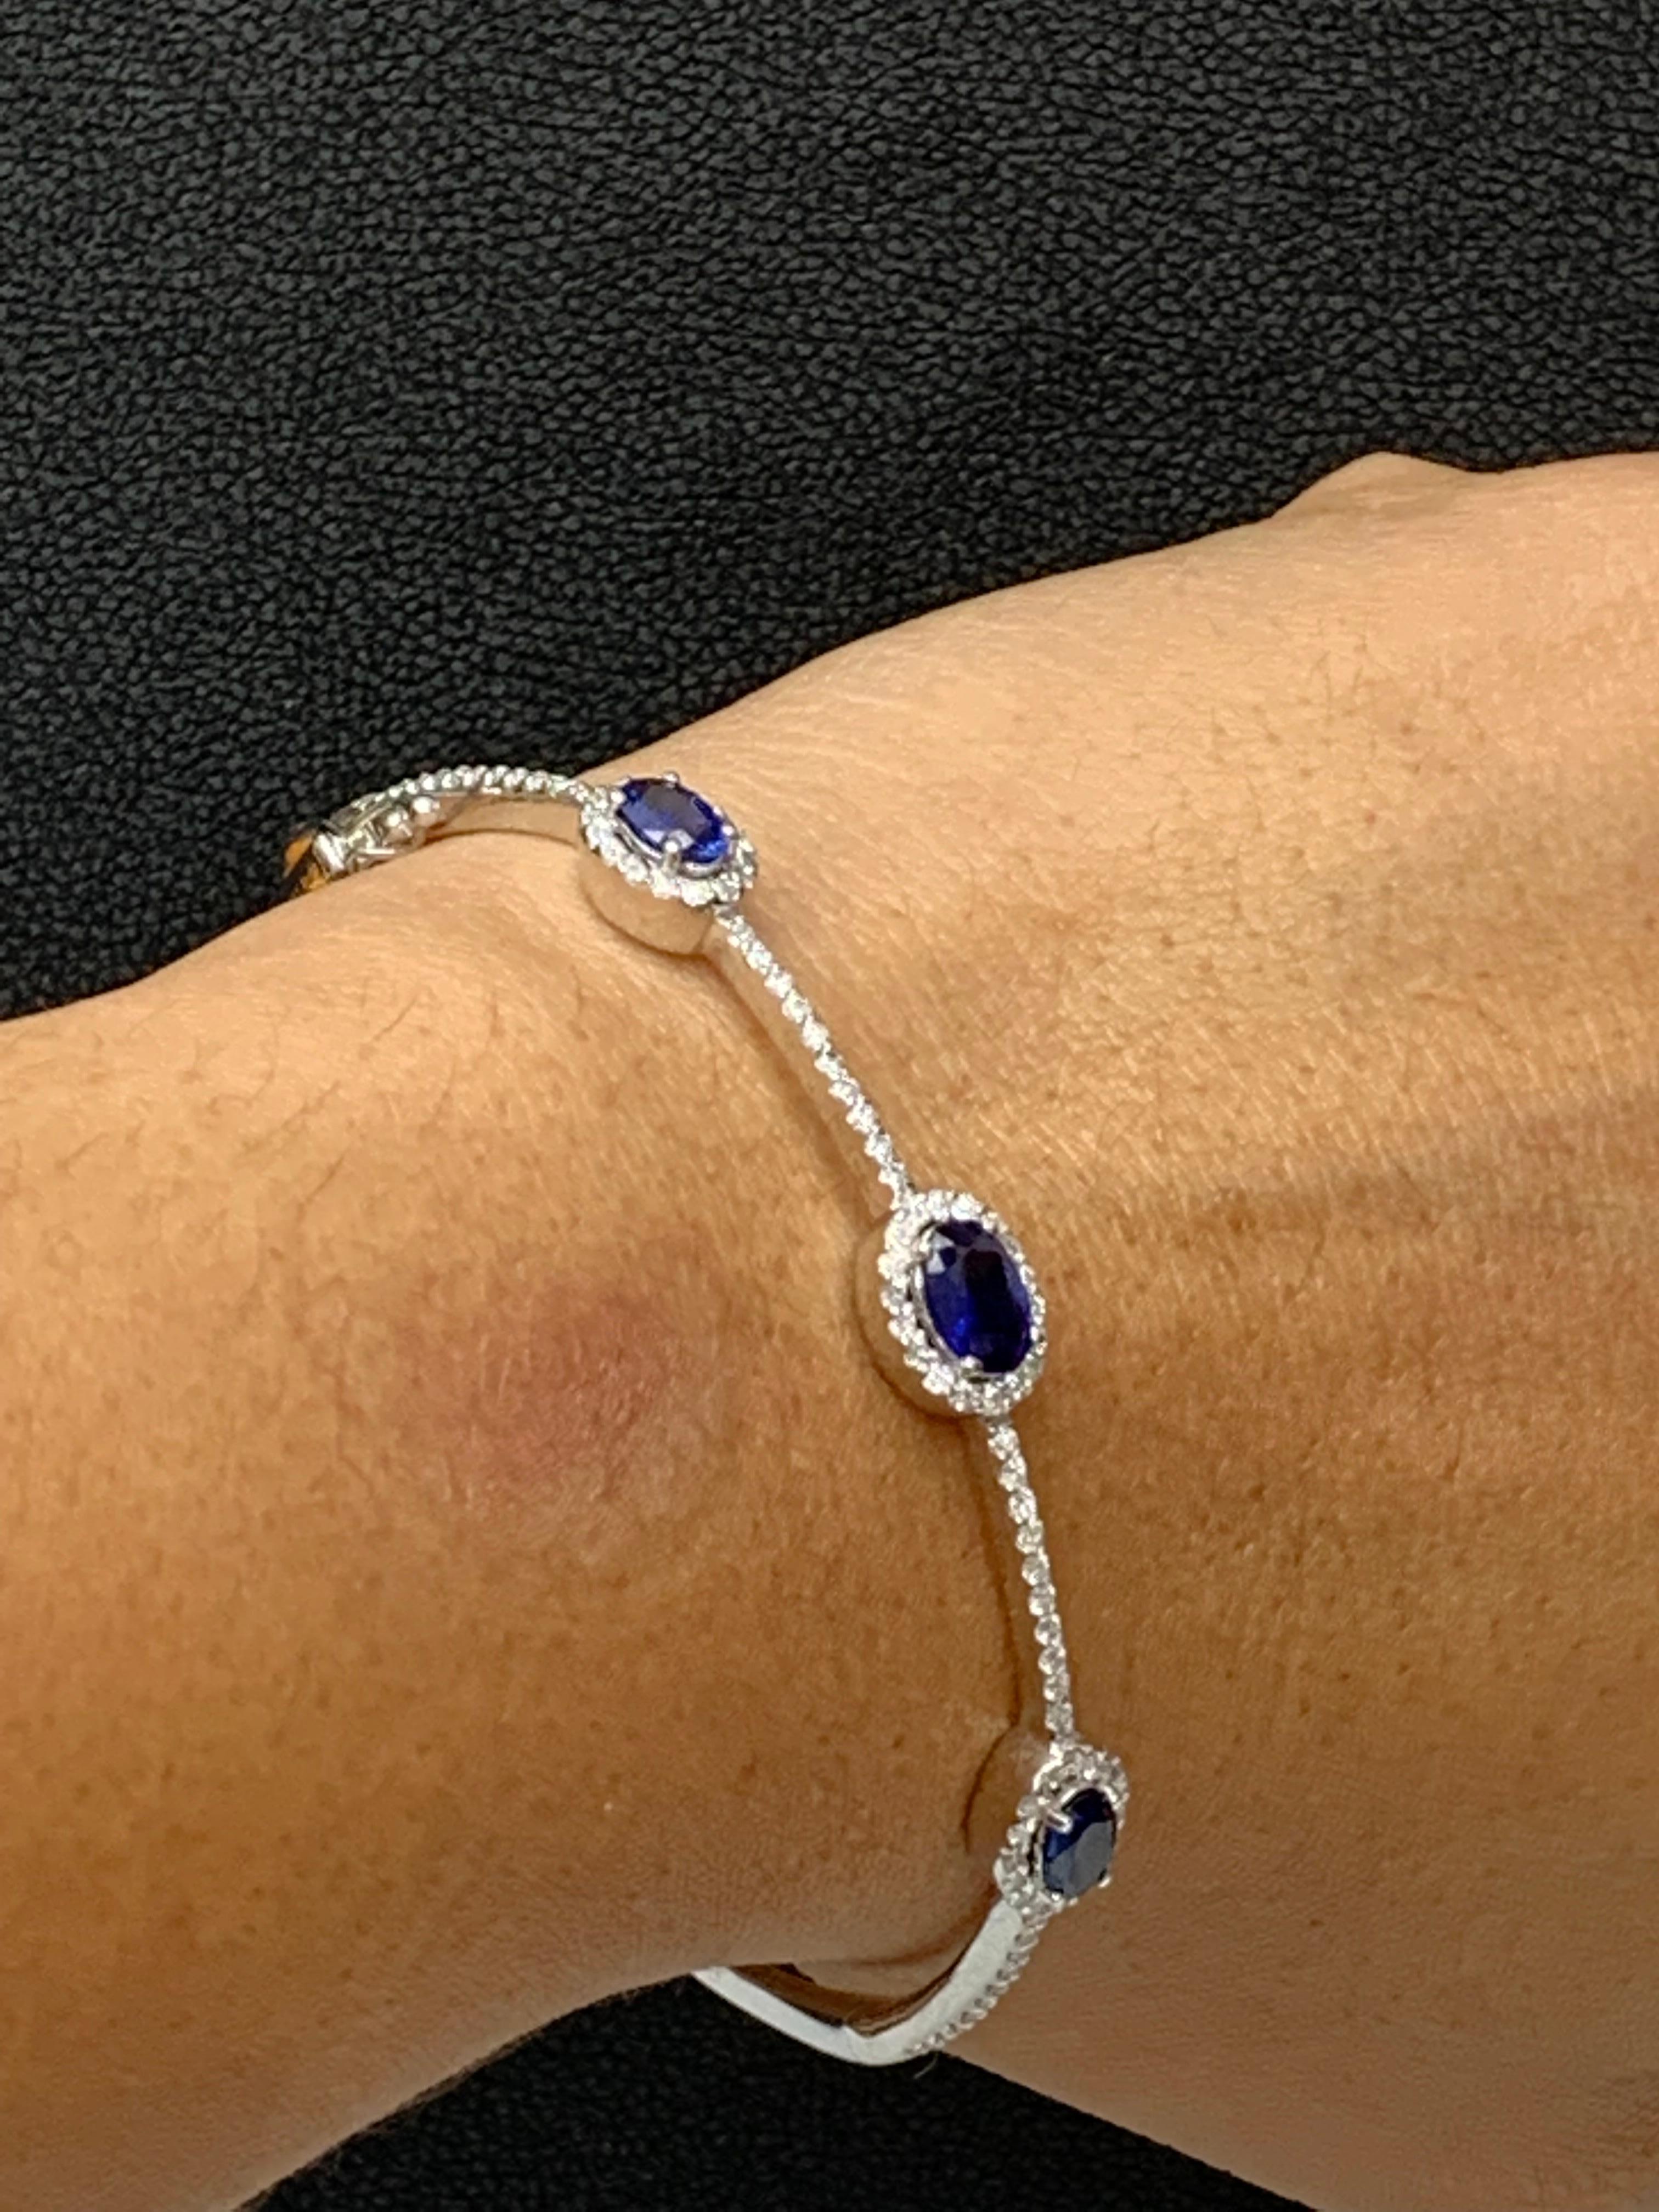 1.80 Carat Oval Cut Sapphire and Diamond Bangle Bracelet in 14K White Gold For Sale 6